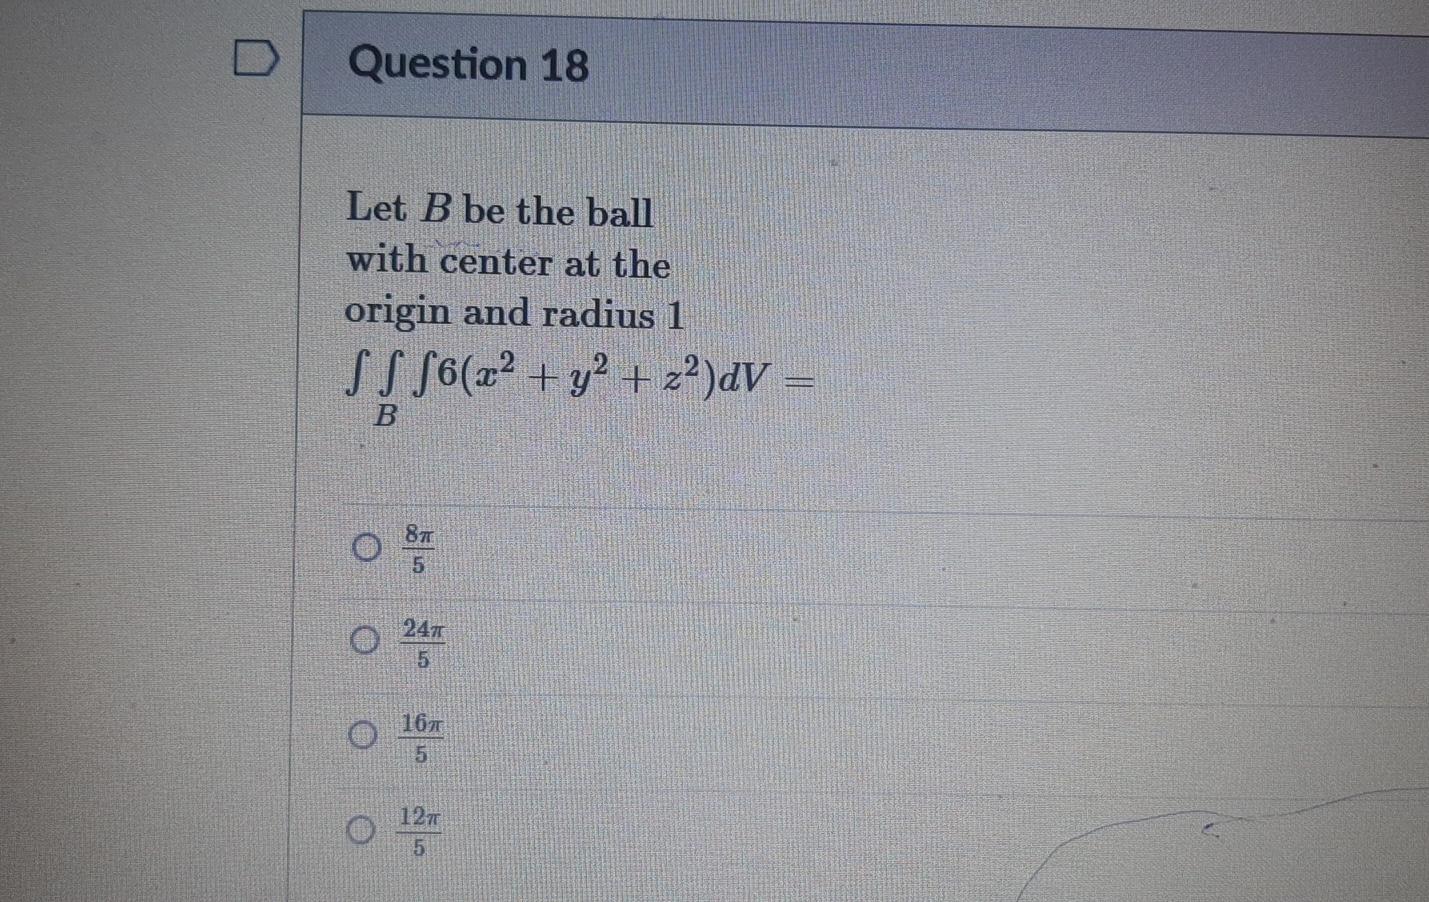 D Question 18 Let B Be The Ball With Center At The Origin And Radius 1 Ss S6 X Y2 Z2 Dv 247 5 O 167 5 127 5 1